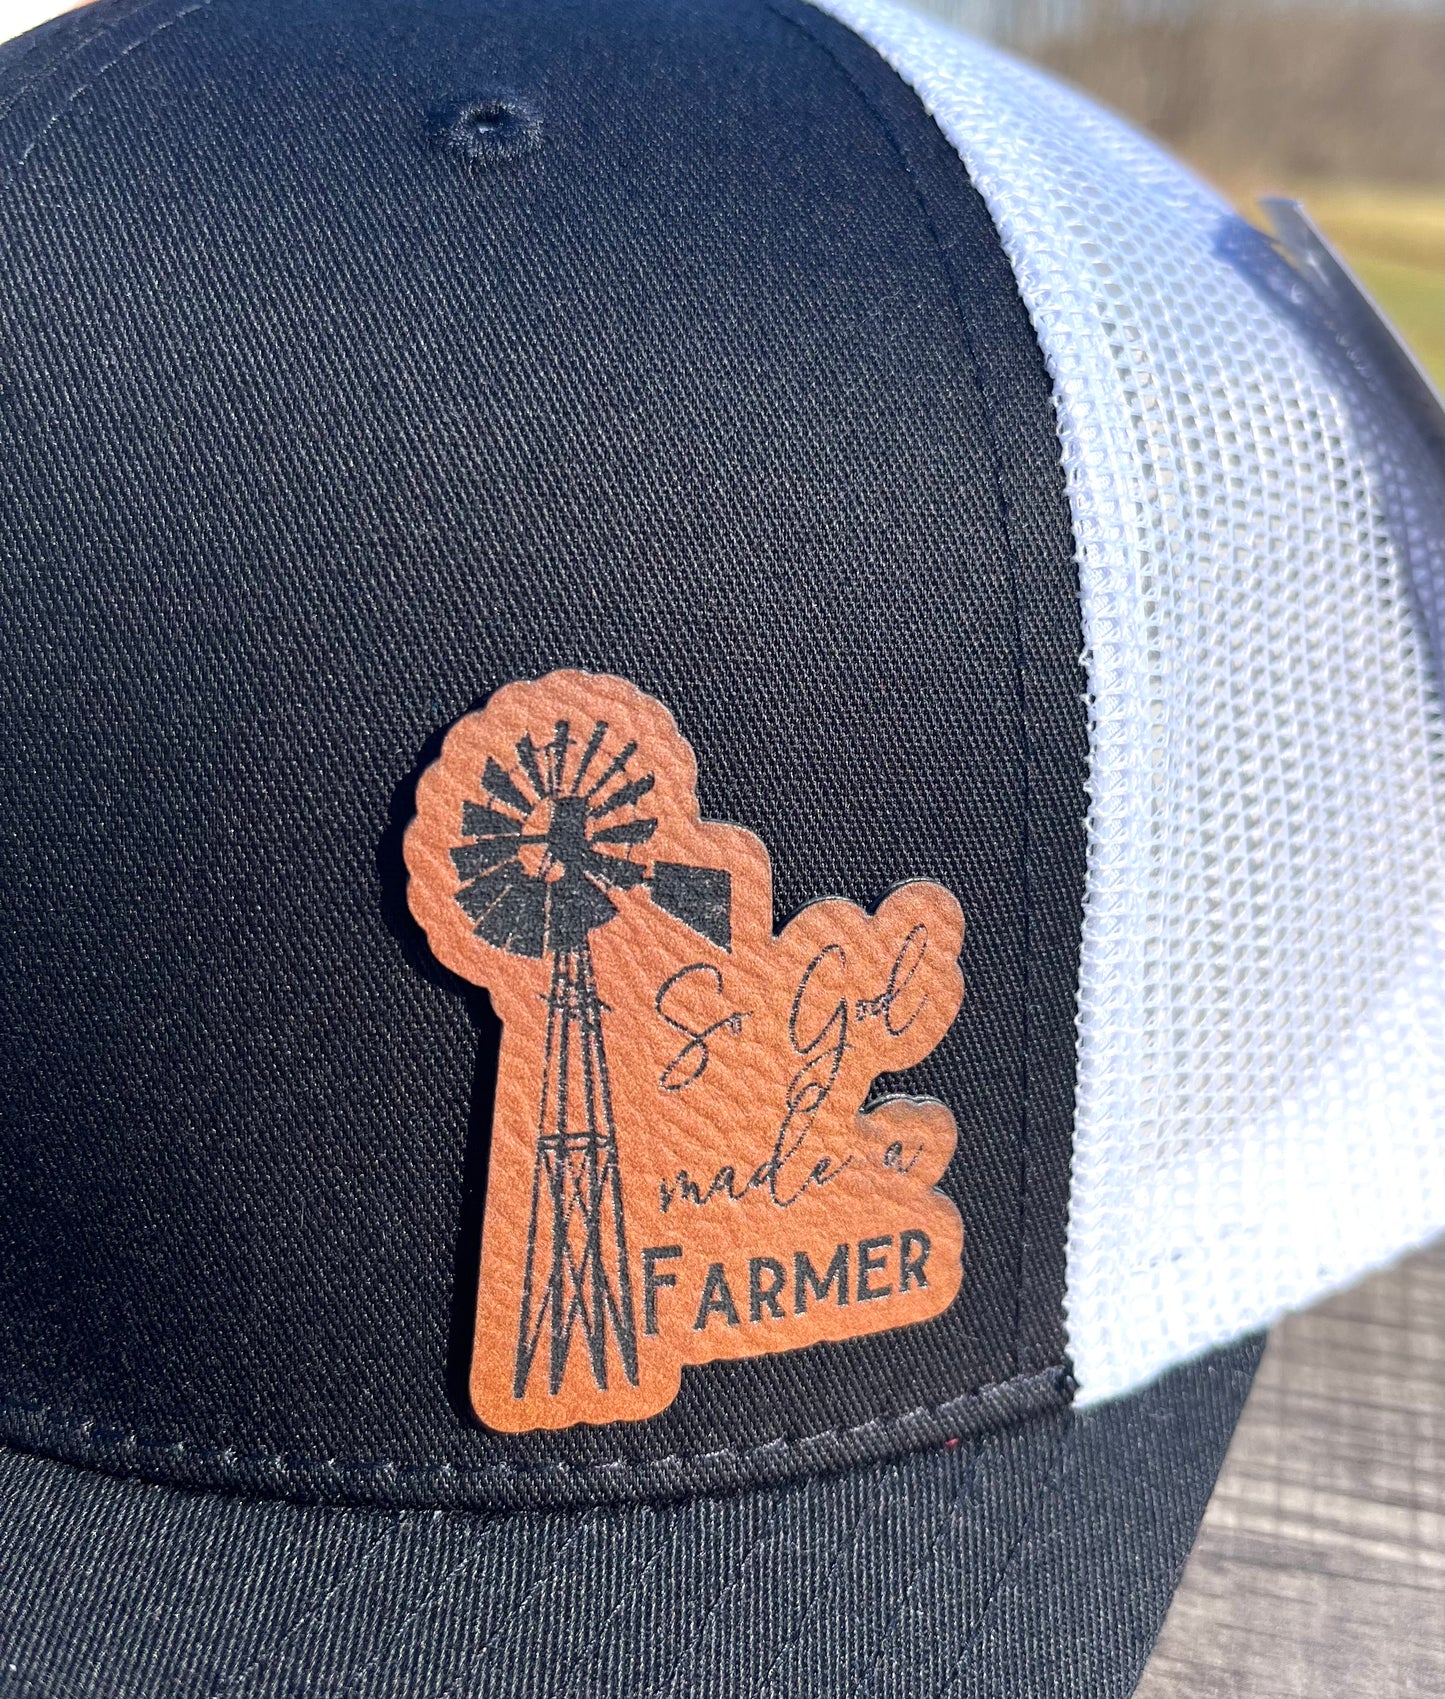 God Made a Farmer leather patch hat